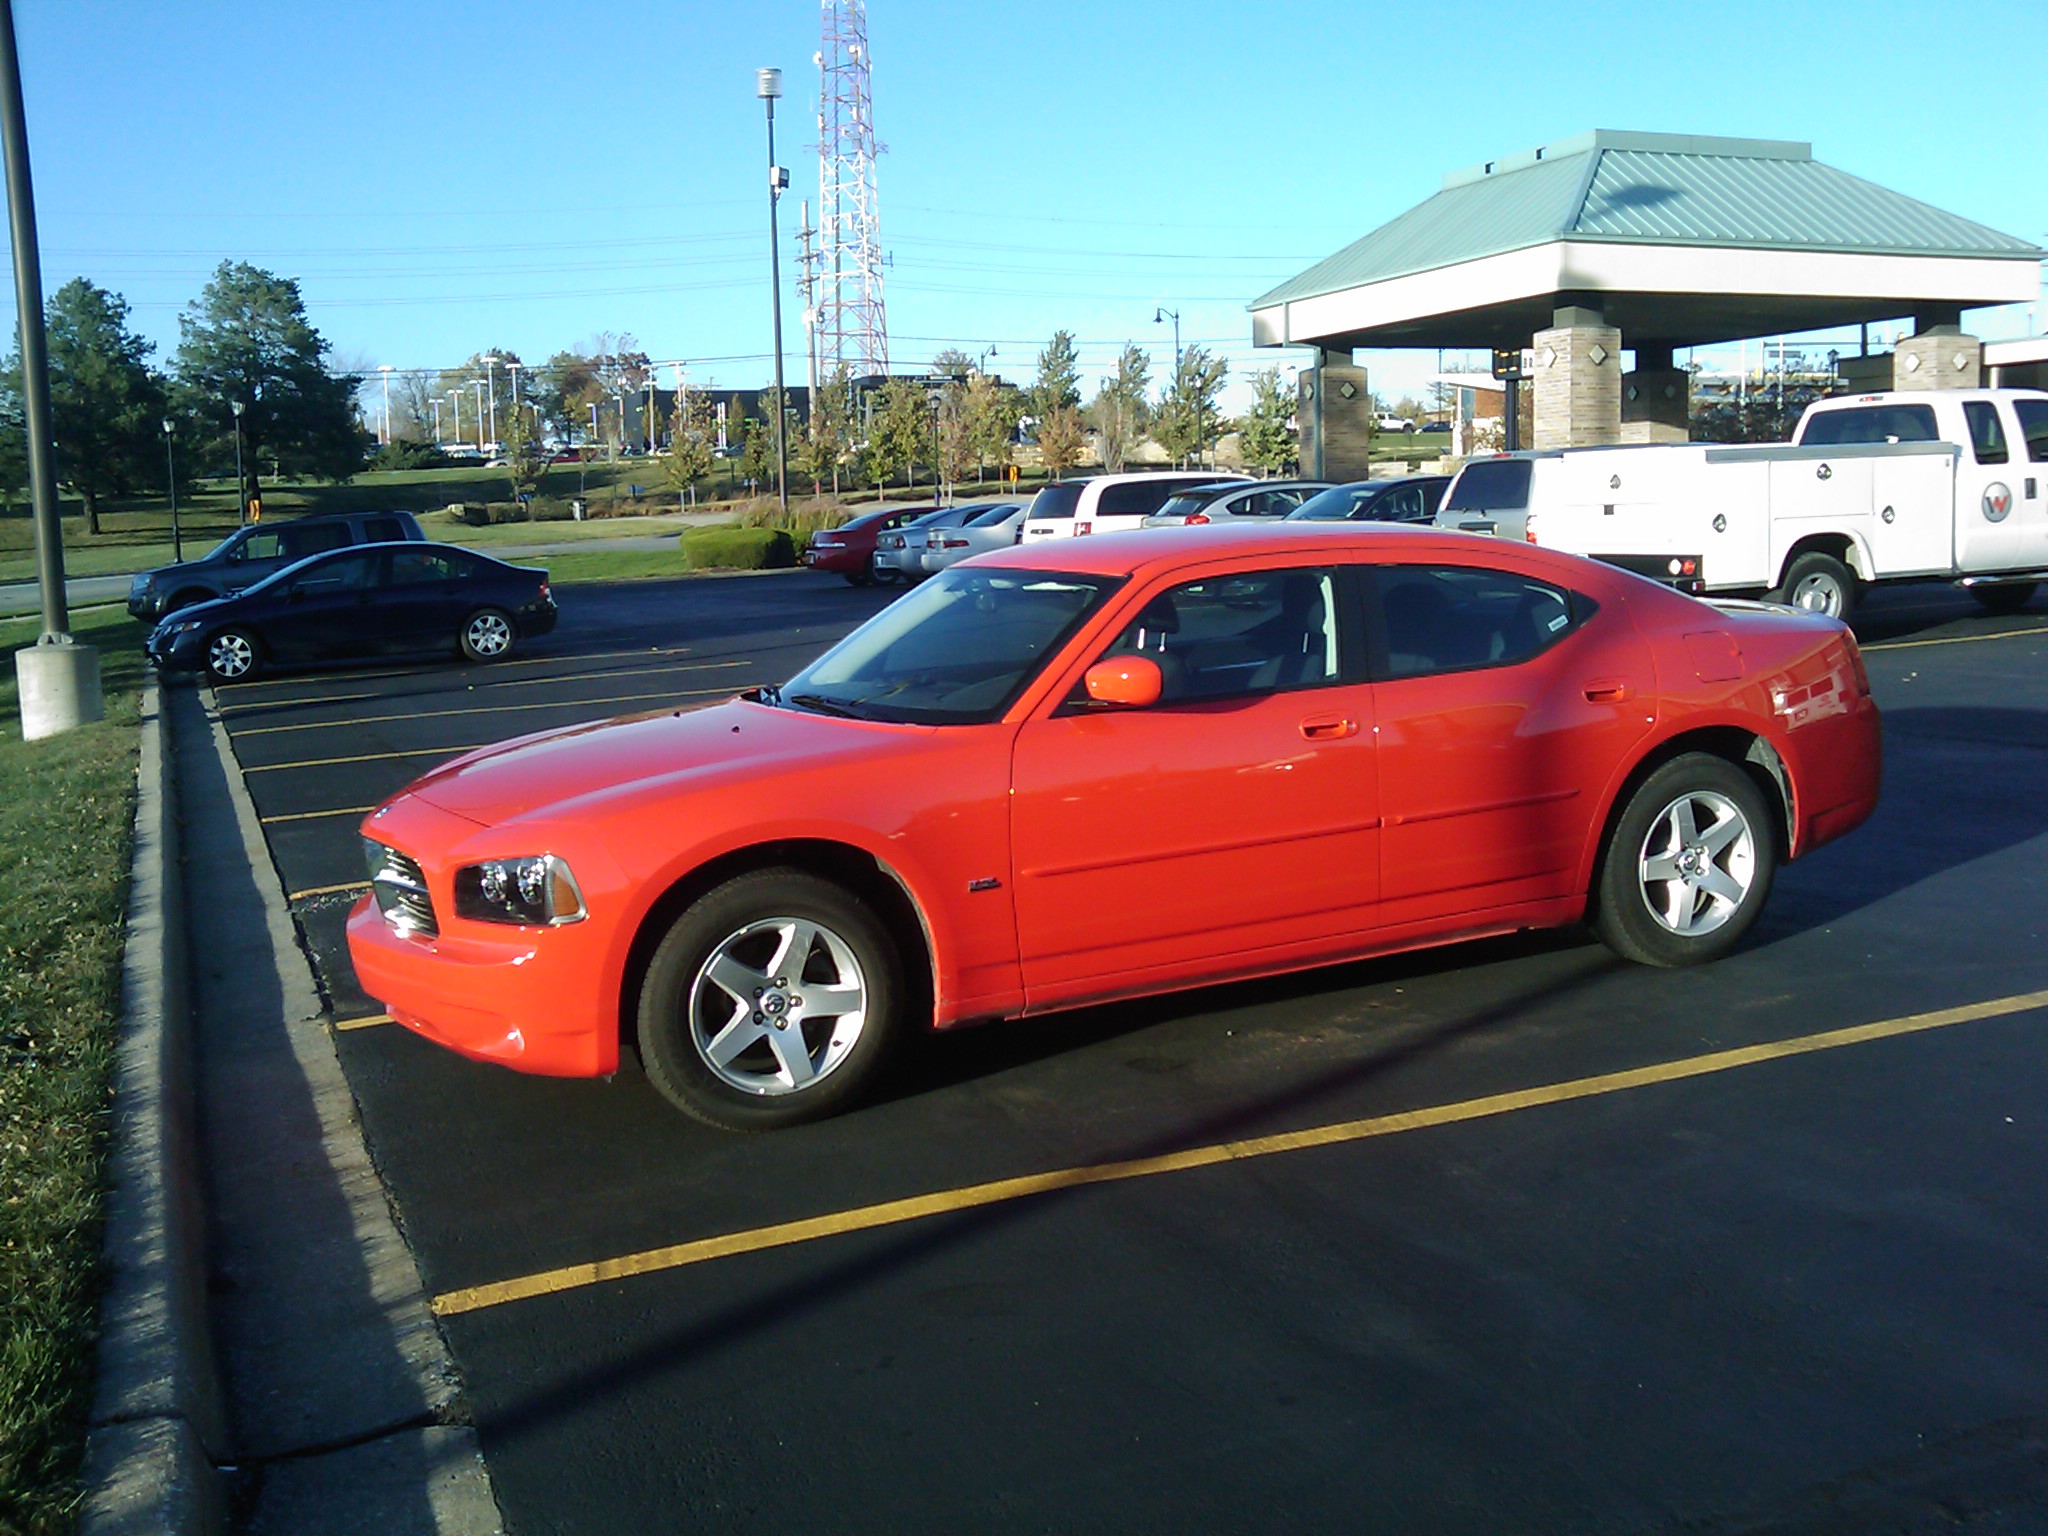 Mein Auto in Kansas (Dodge Charger)